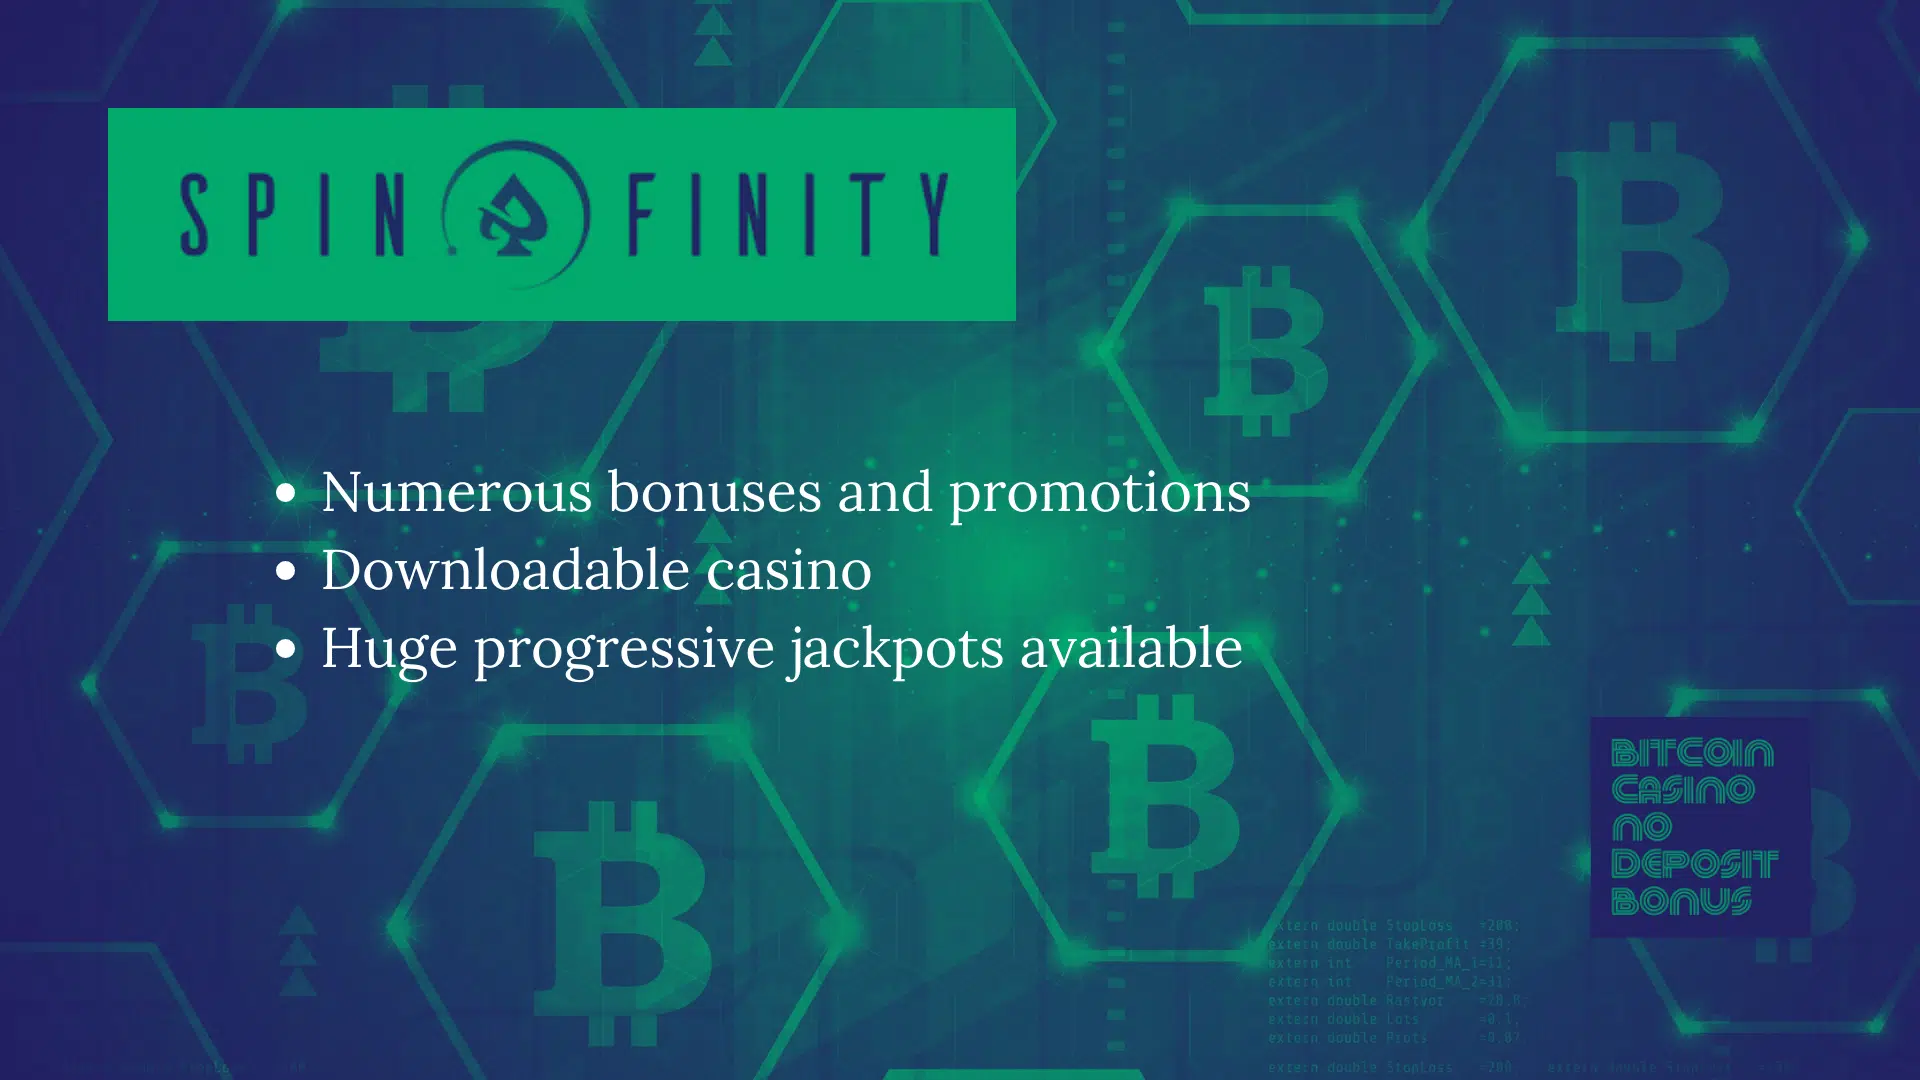 You are currently viewing Spinfinity Casino Promo Codes – Spinfinity.casino Free Spins December 2022